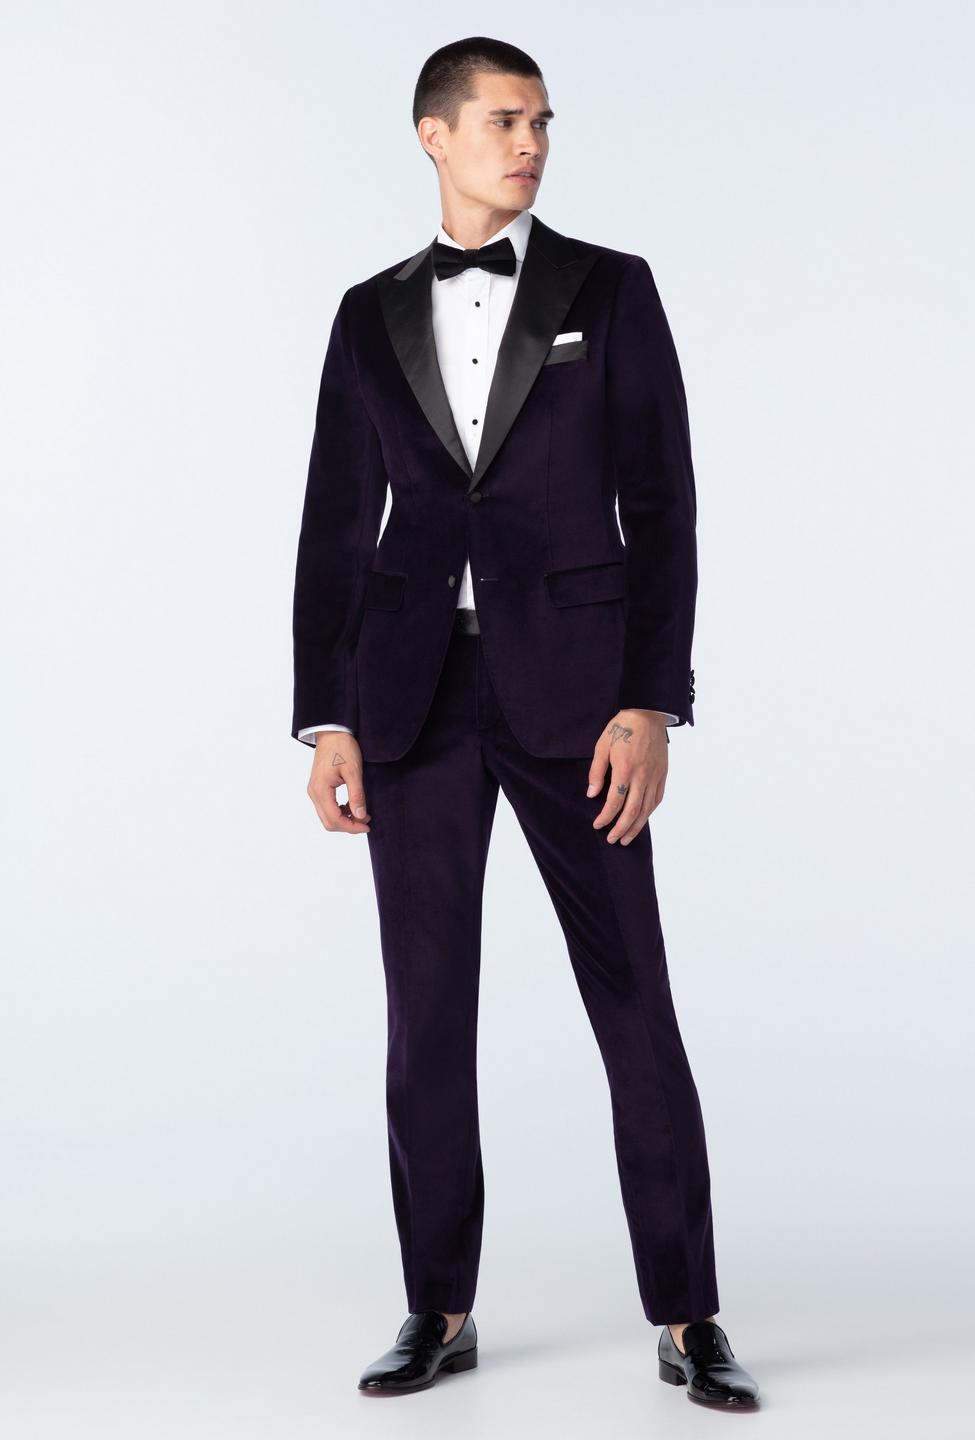 Purple suit - Hardford Solid Design from Tuxedo Indochino Collection